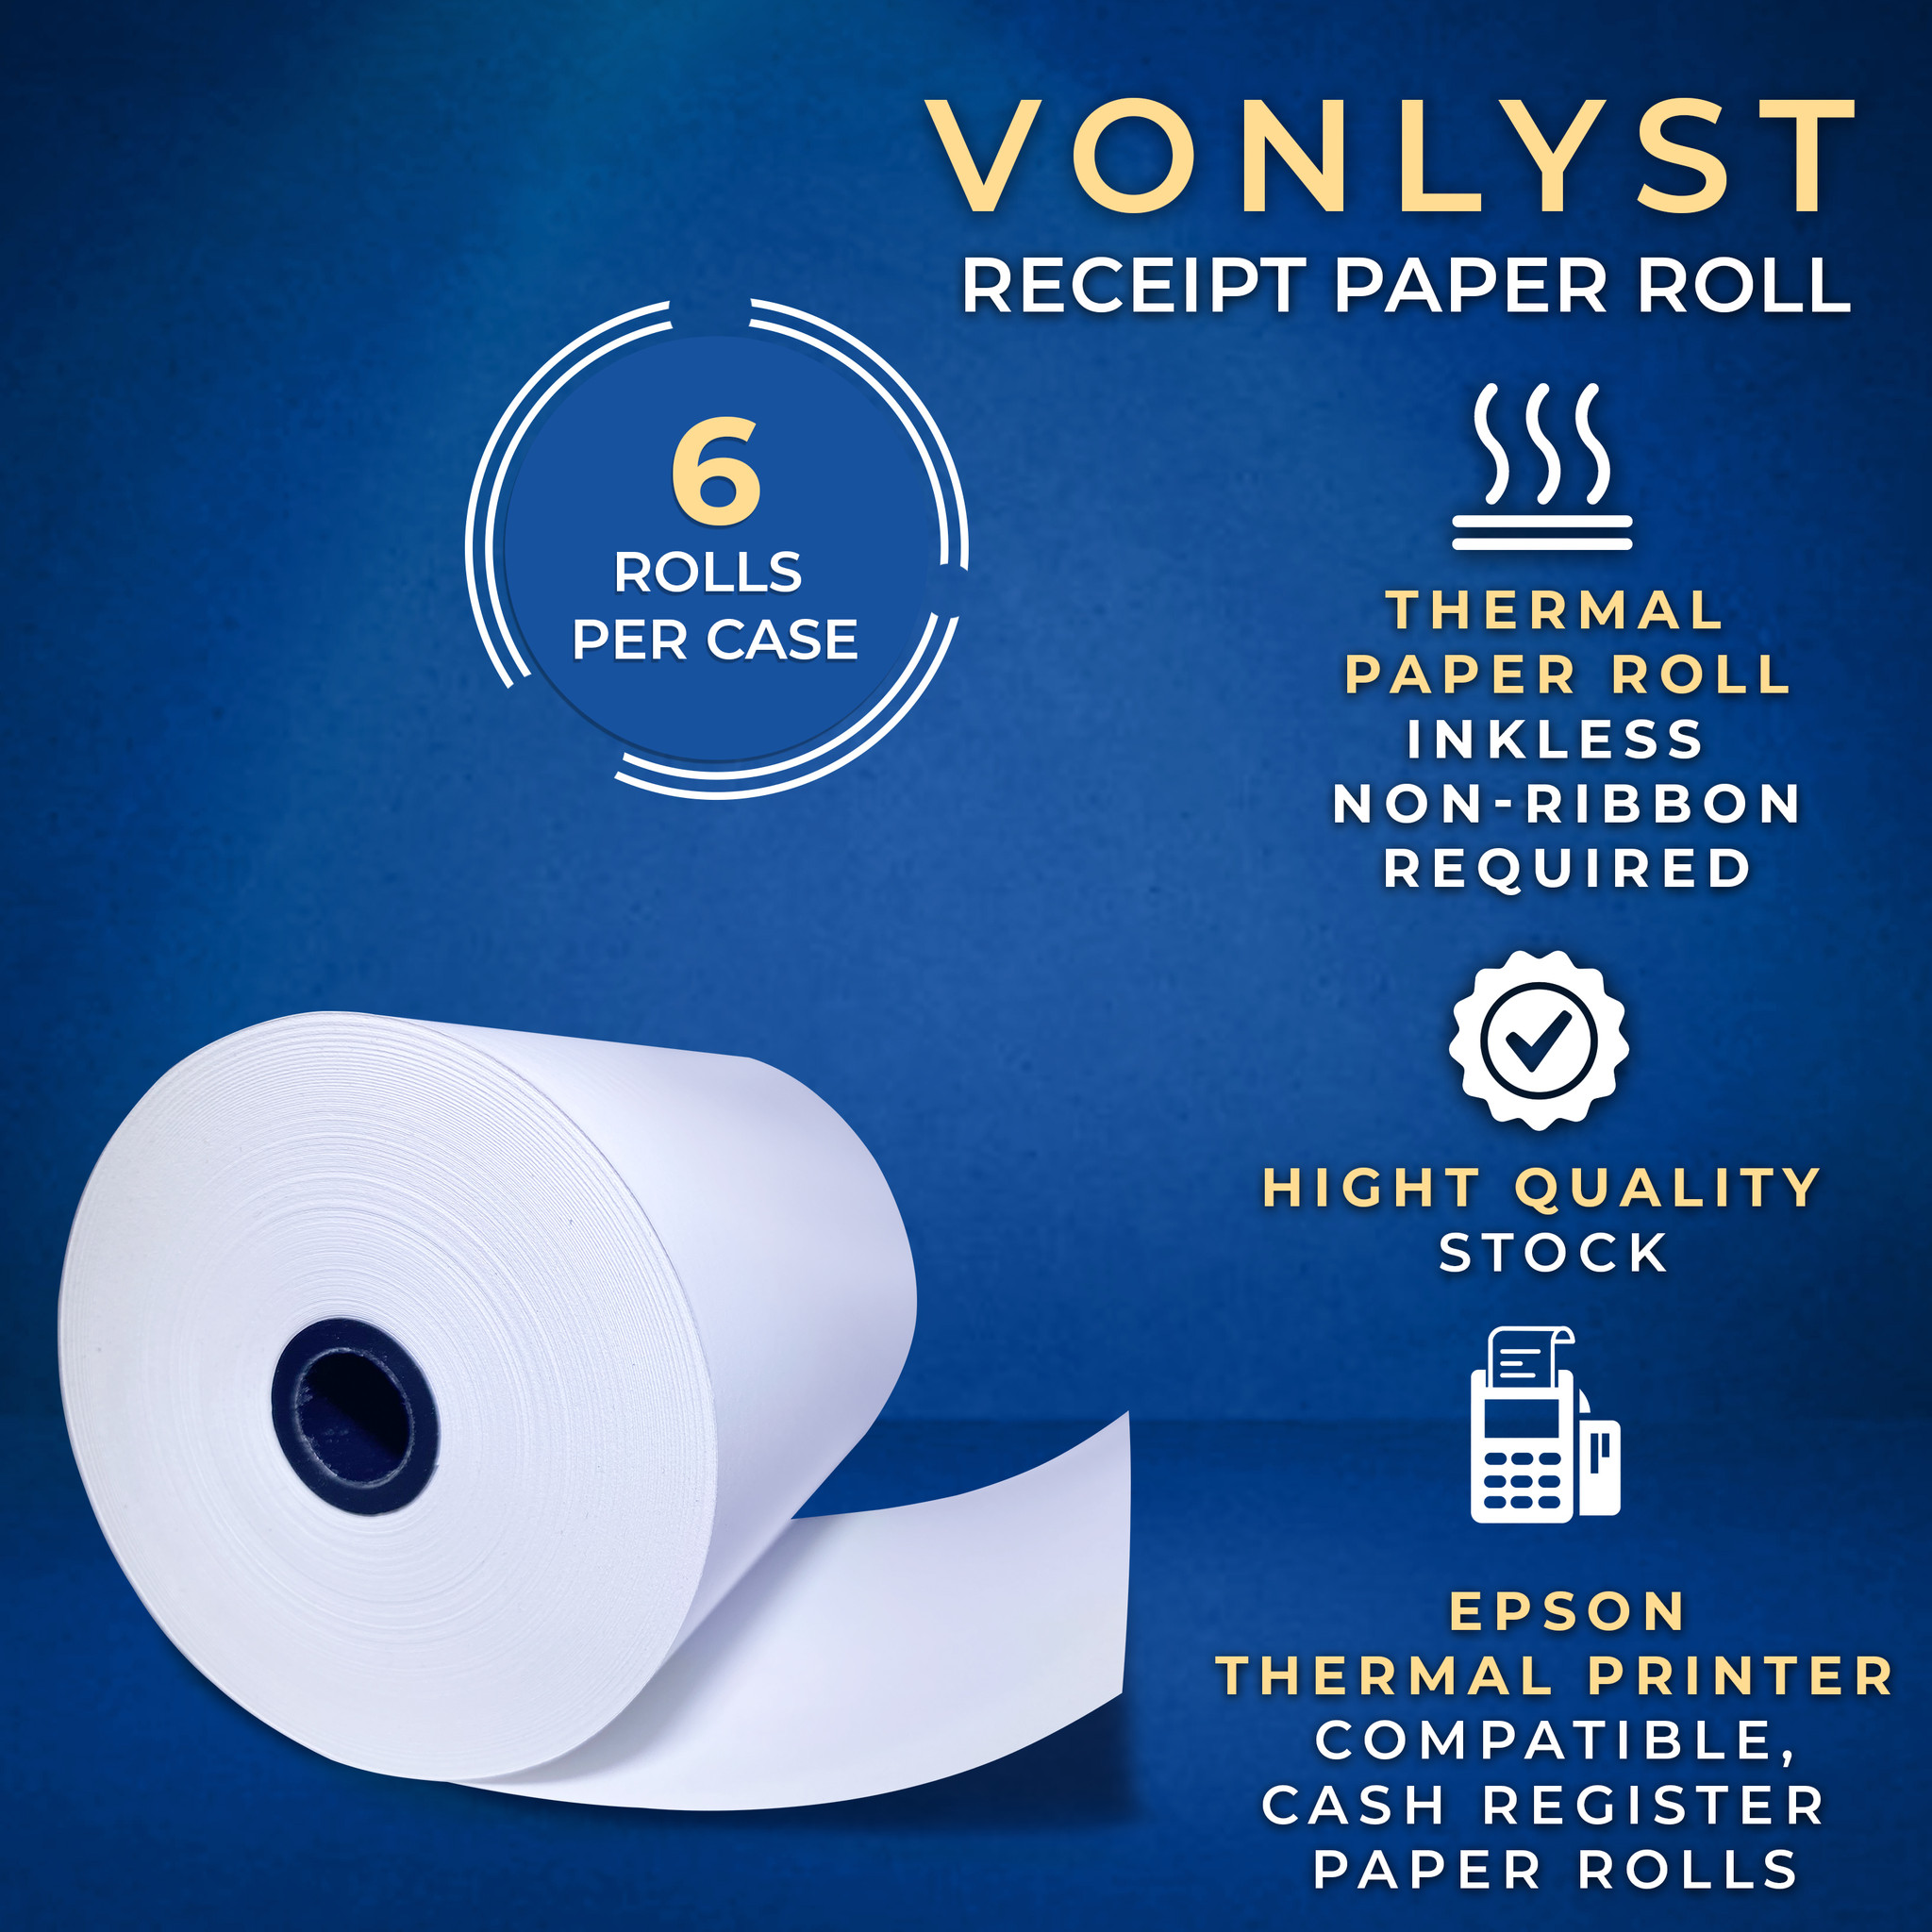 Epson Thermal Receipt Paper Roll 3 1/8 x 230' - Box with 06 - Vonlyst